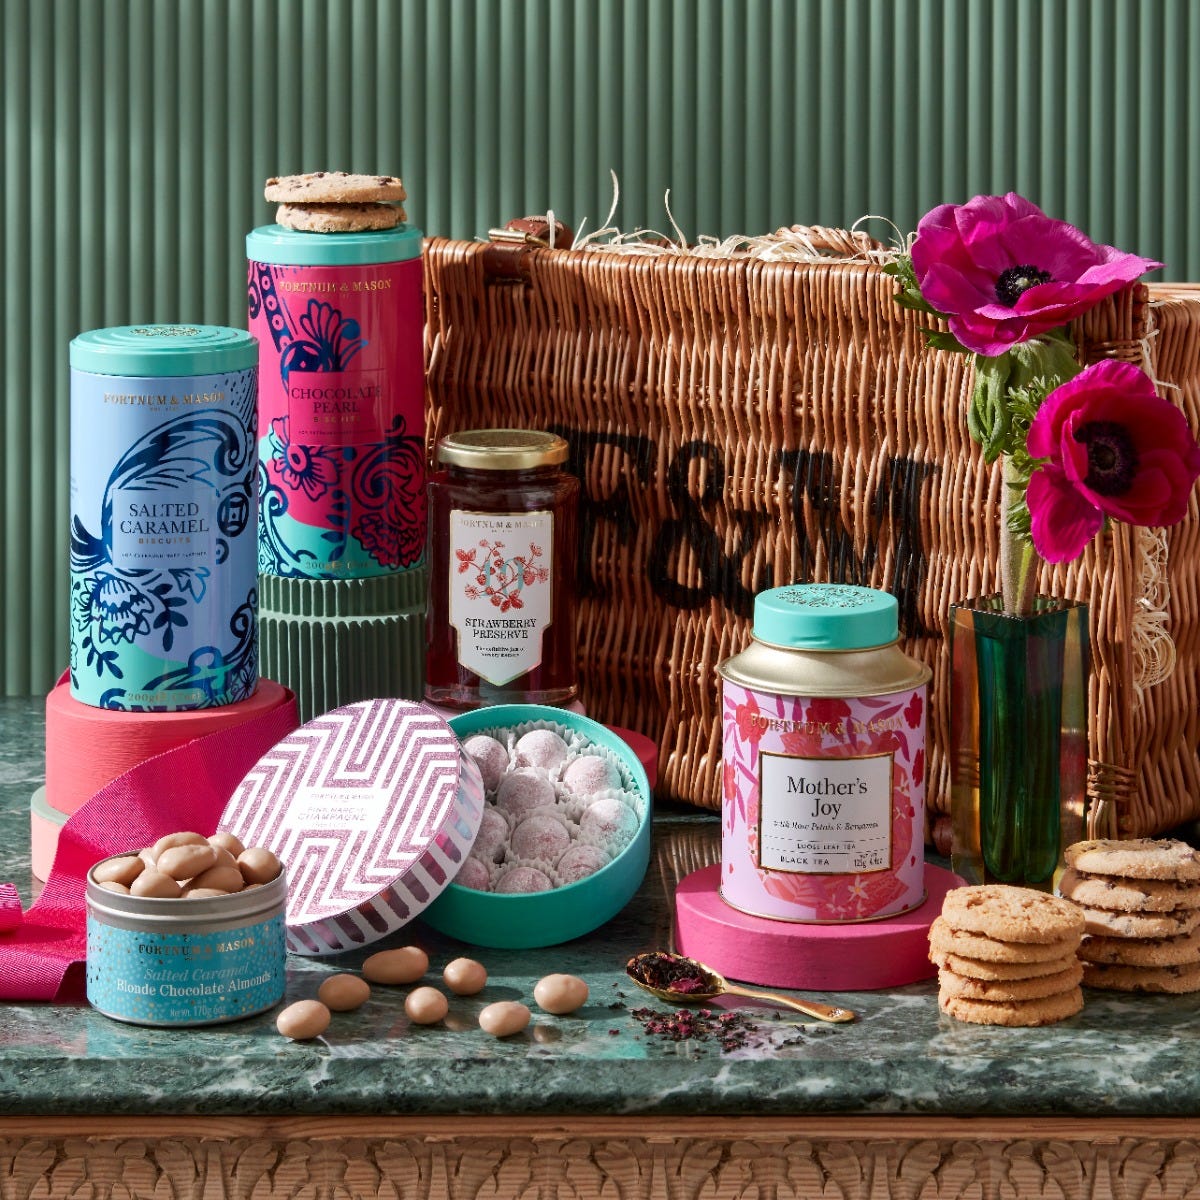 The Mother's Day Hamper, Biscuits, Teas, Preserves, Fortnum & Mason